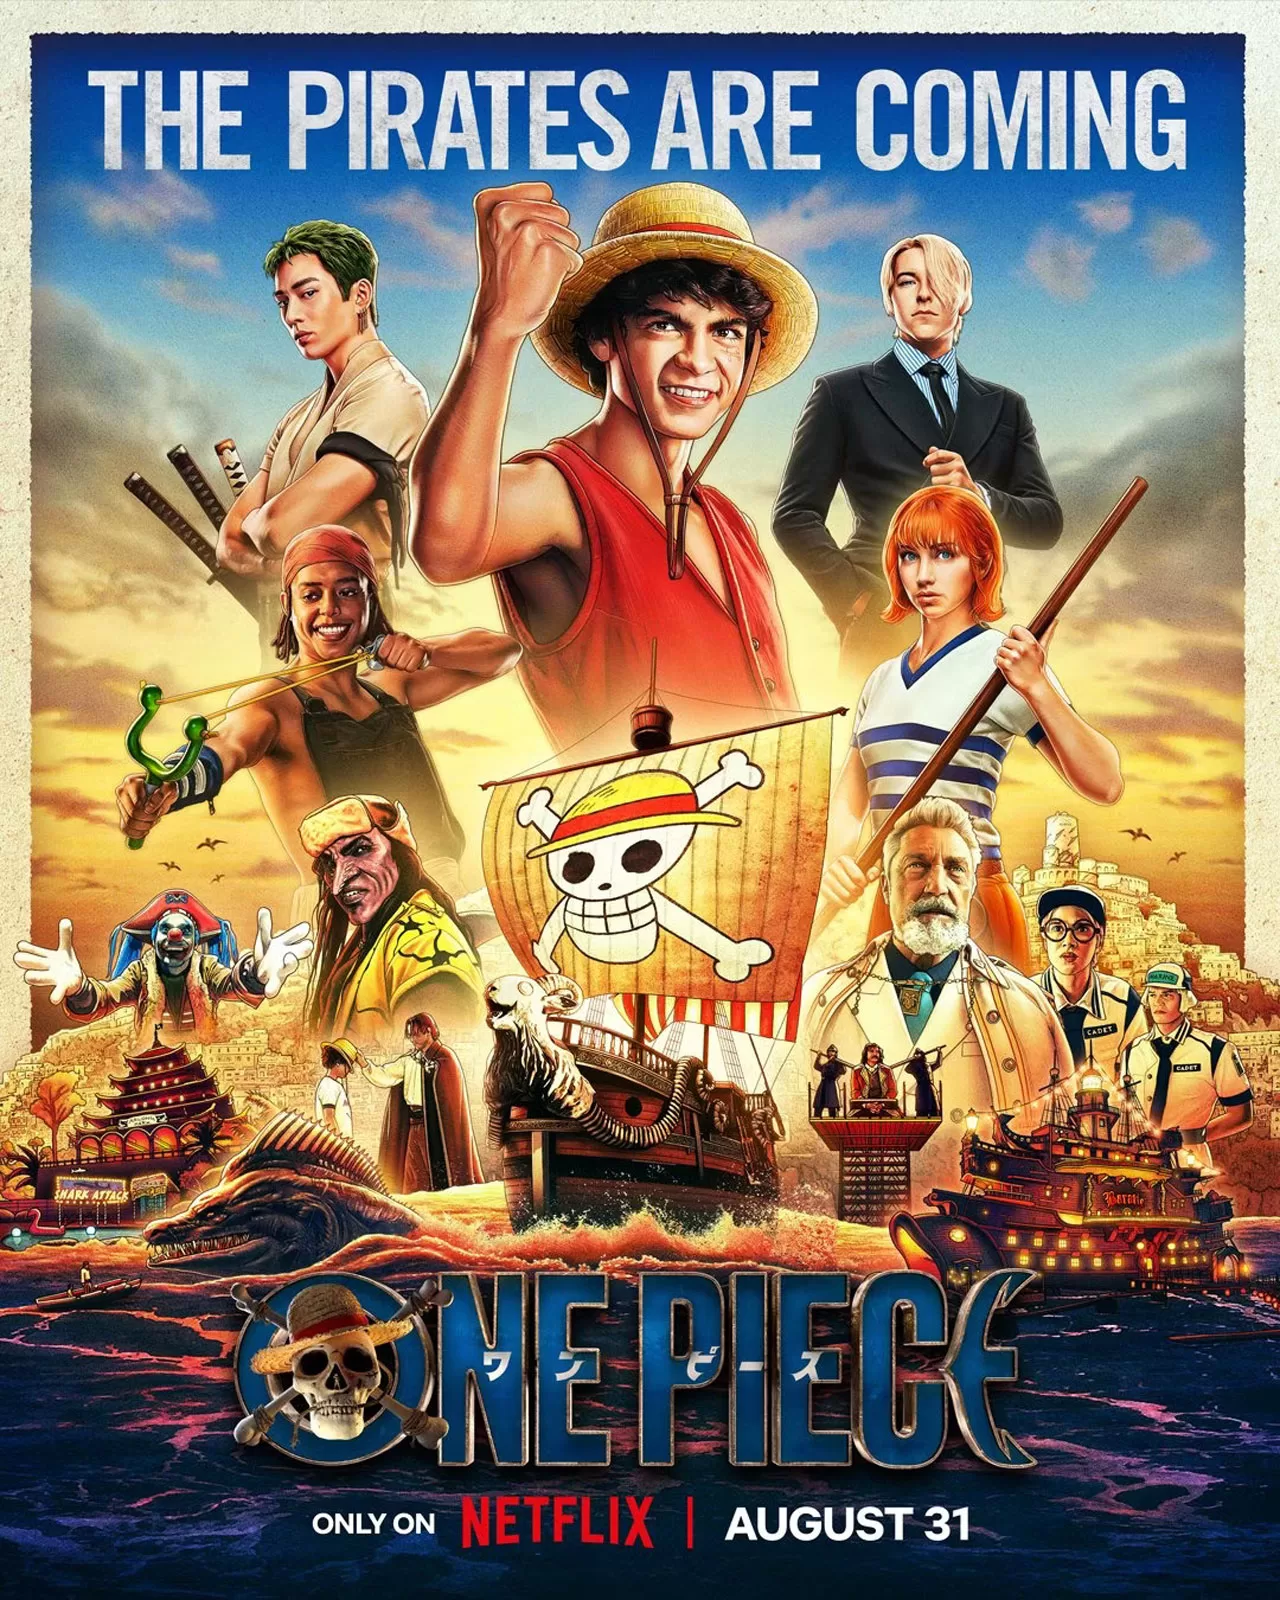 Cult classic manga sets sail in Netflix's live-action One Piece